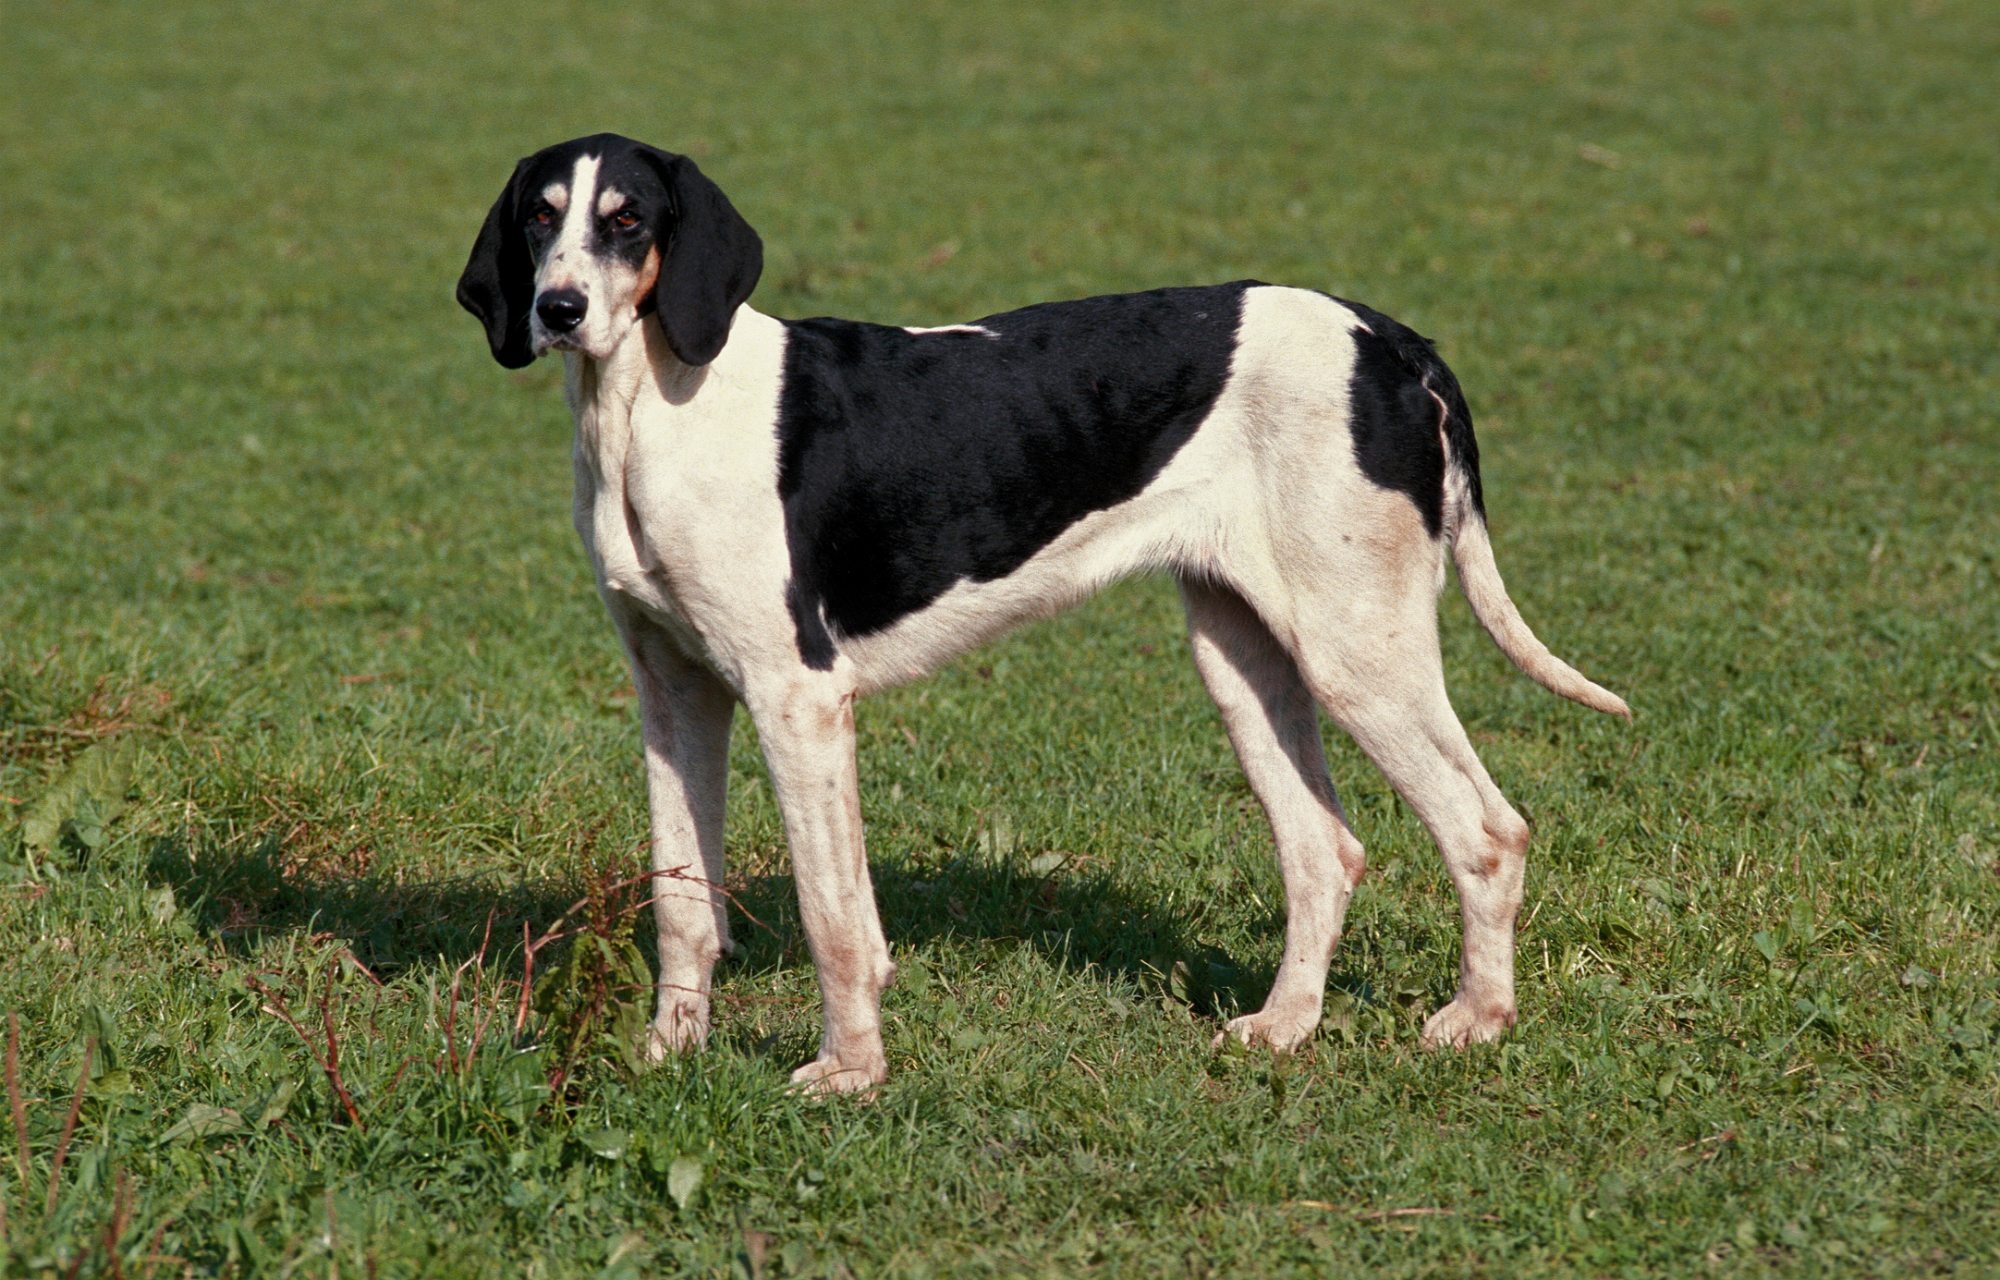 Great Anglo Francais Black and White Hound stood alert on grass